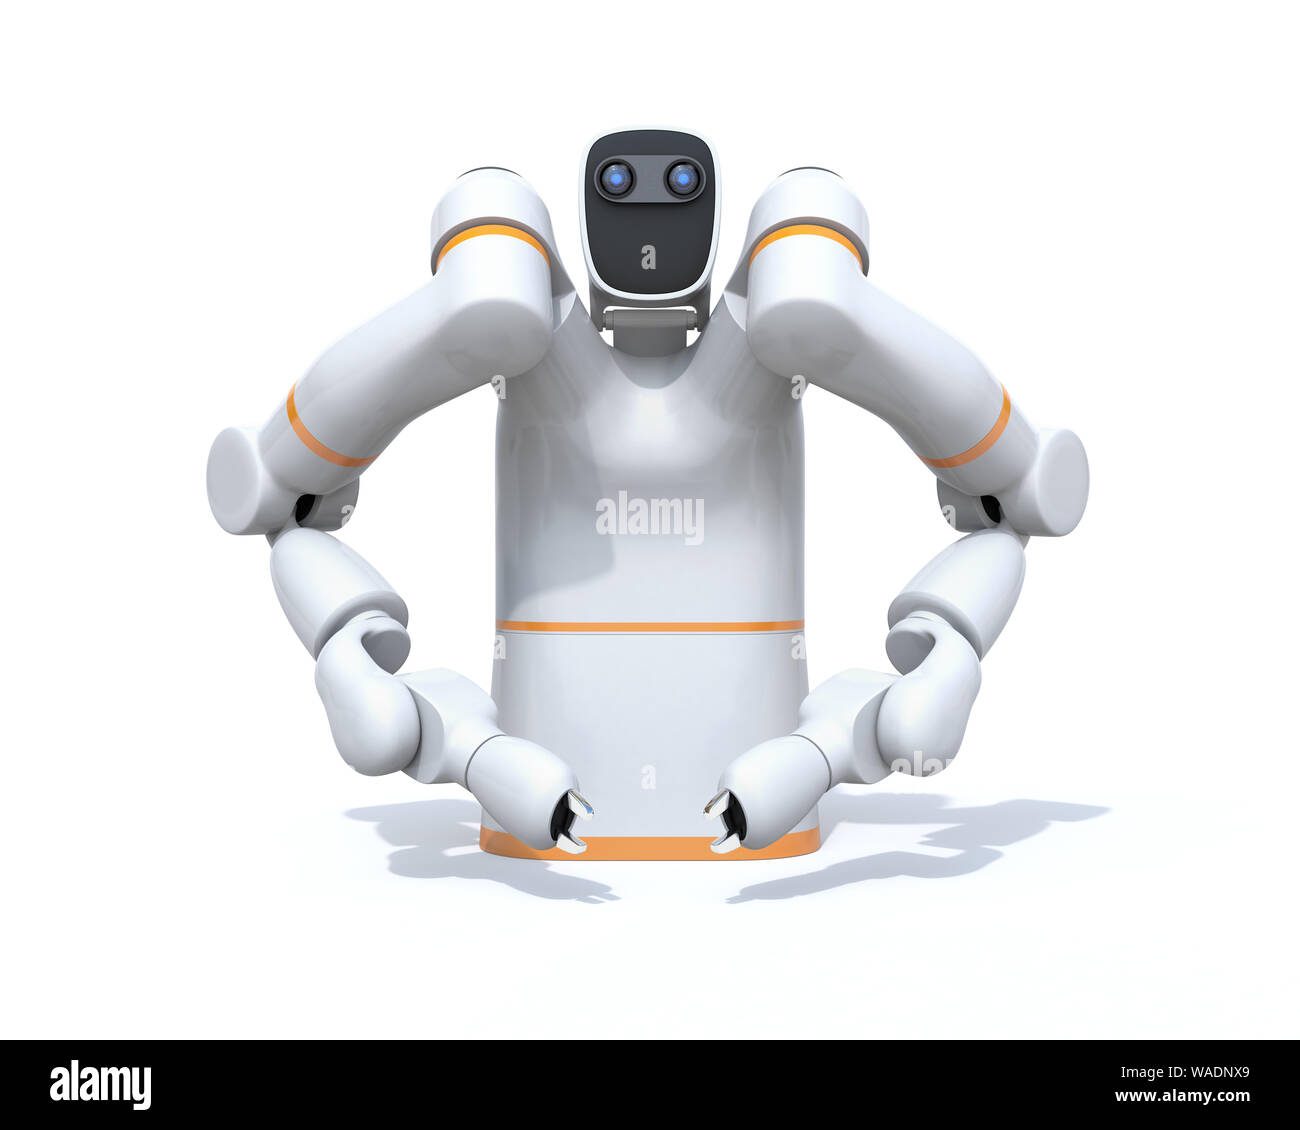 White dual-arm robot on white background. Collaborative robot concept. 3D rendering image. Stock Photo